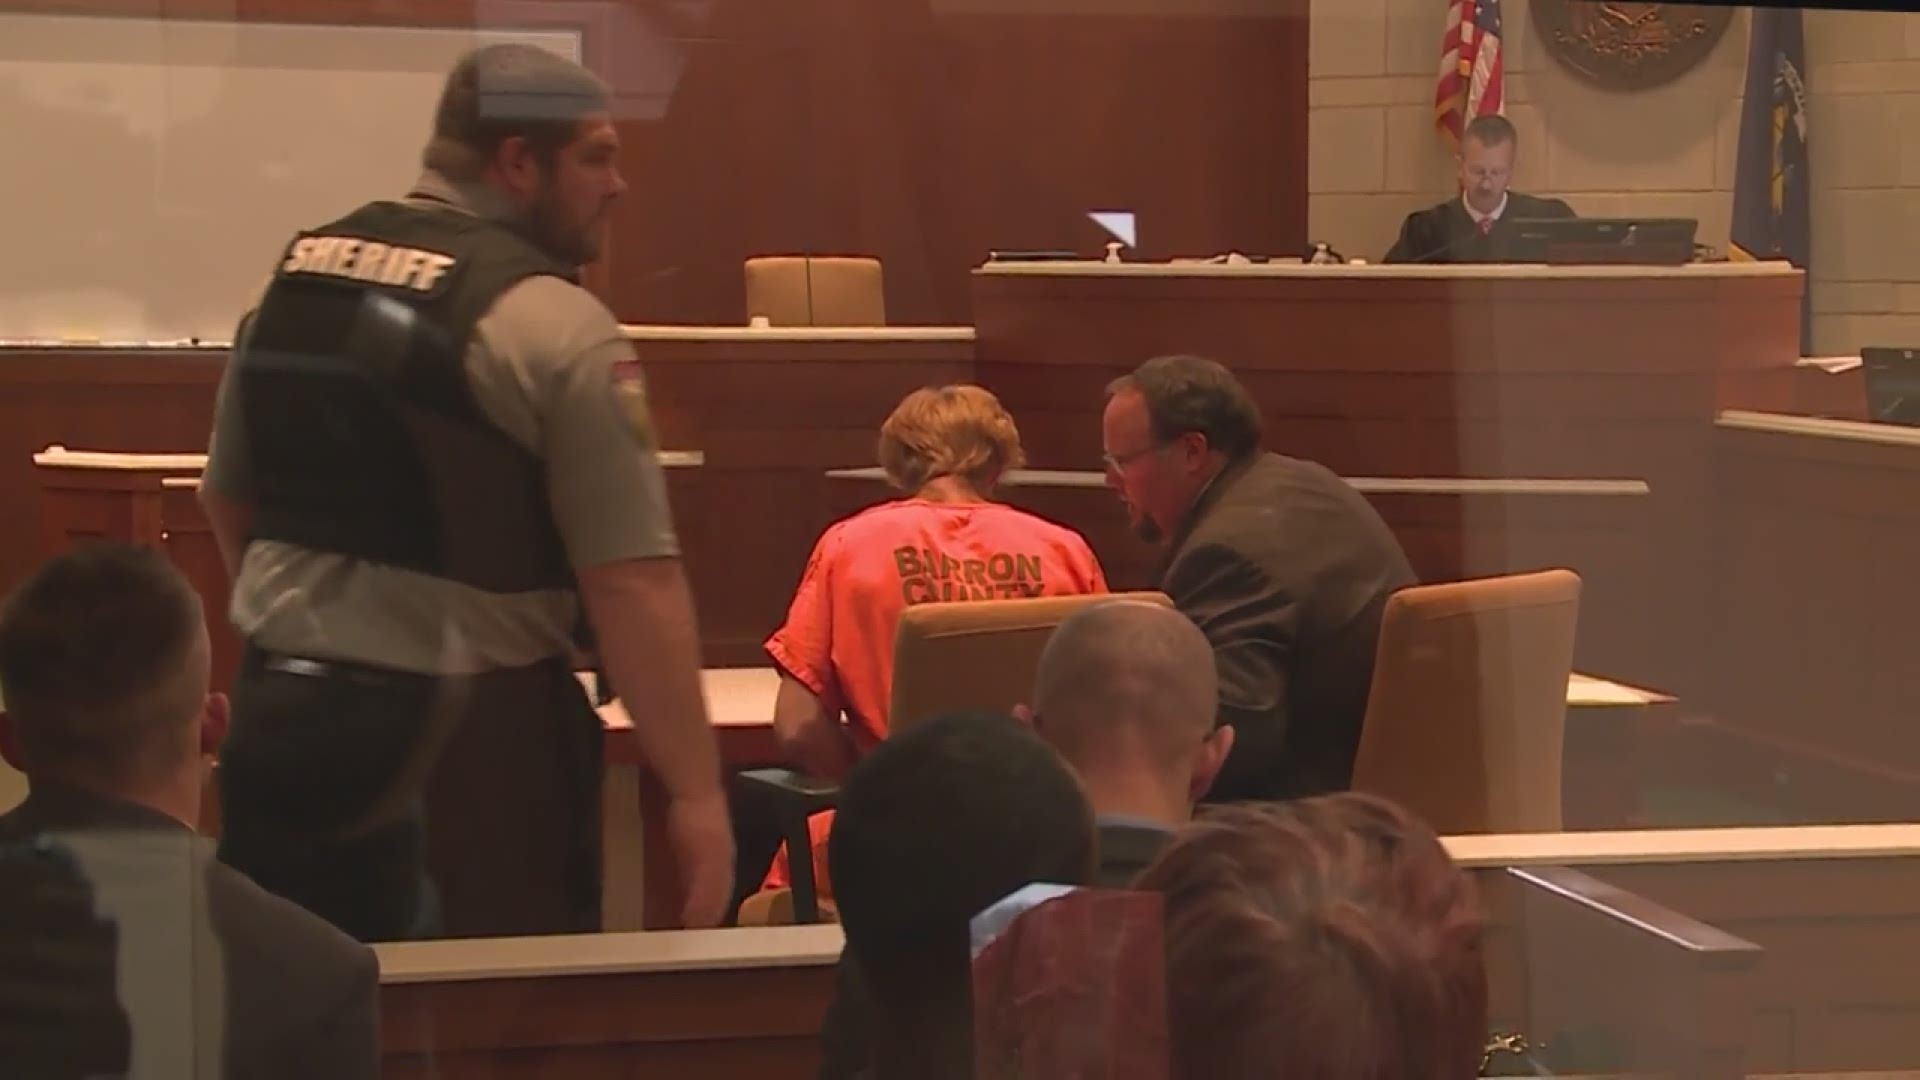 The man accused of sneaking into the home of missing western Wisconsin teen Jayme Closs and stealing her underwear appeared in court Wednesday.